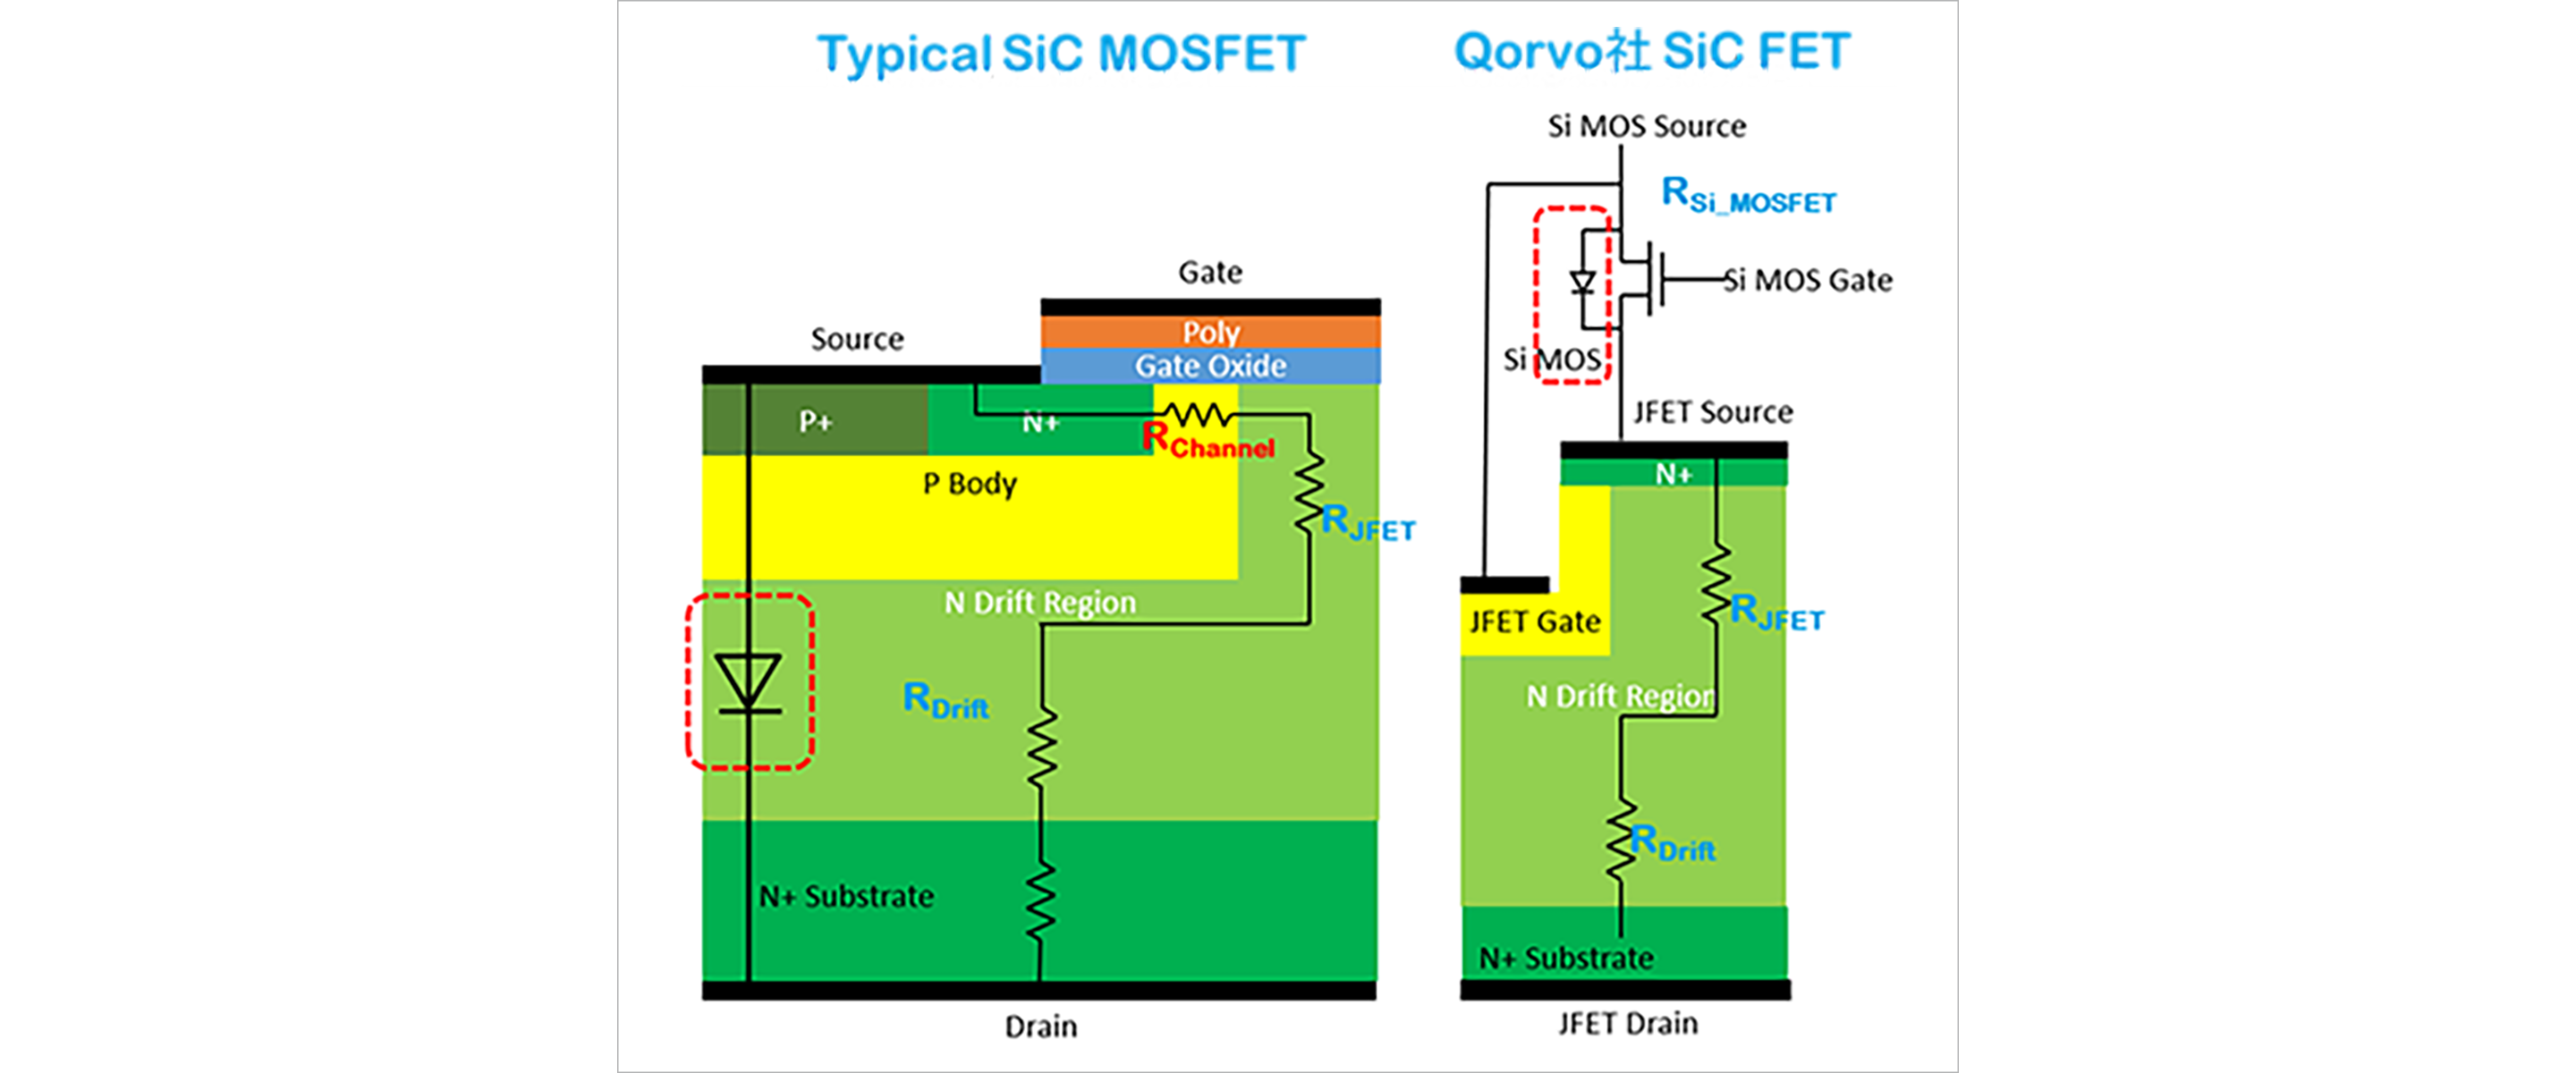 Figure 1: Schematic cross-sectional diagram of a typical SiCMOSFET and Qorvo SiC FET